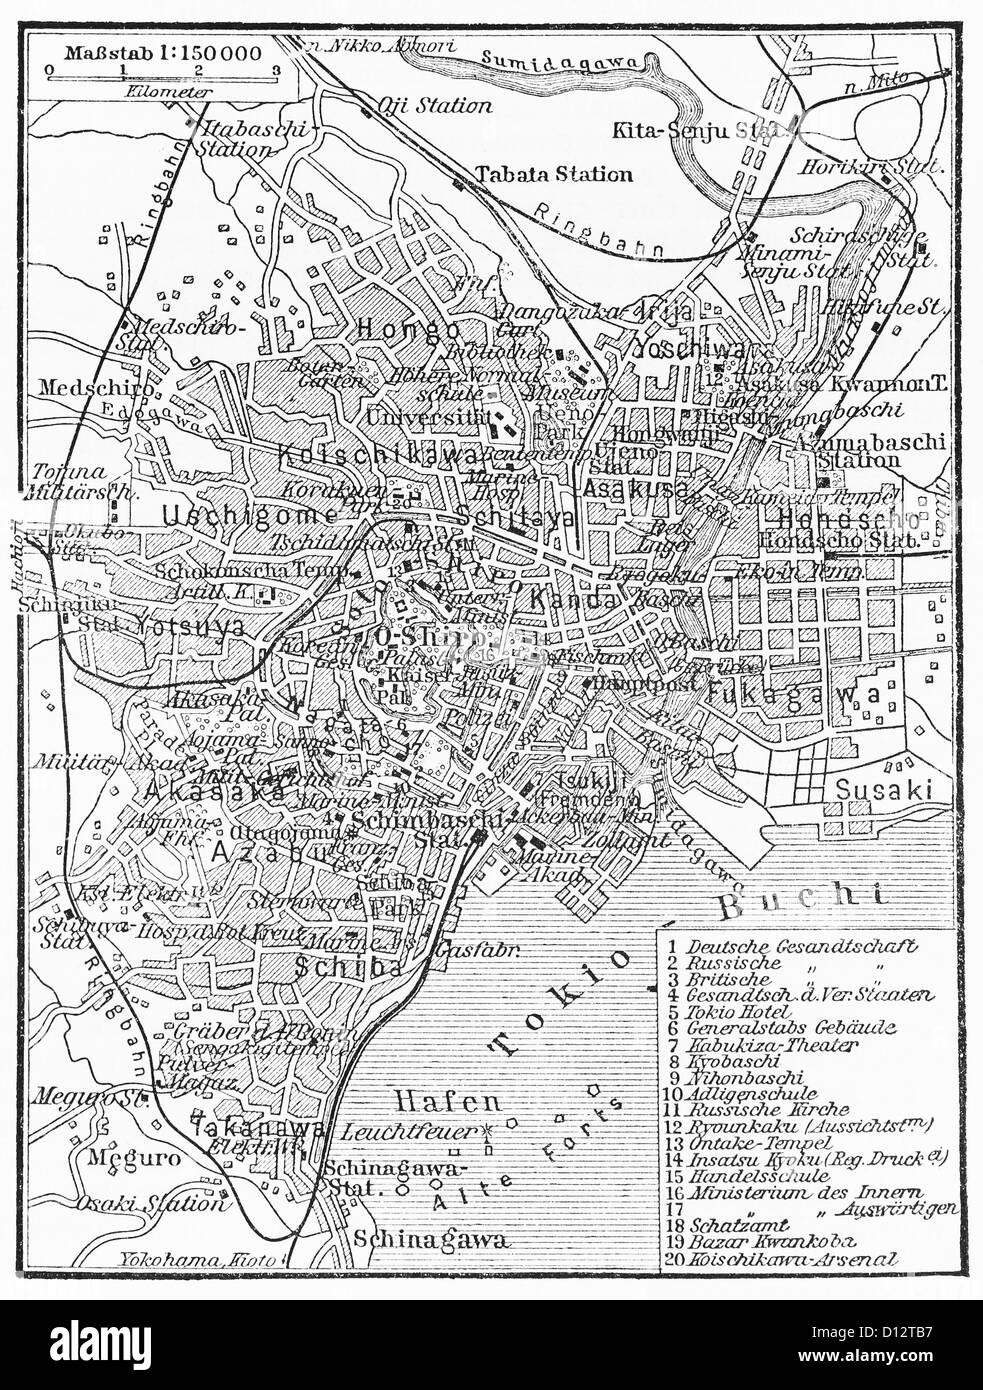 Vintage map of Tokyo at the end of 19th century Stock Photo